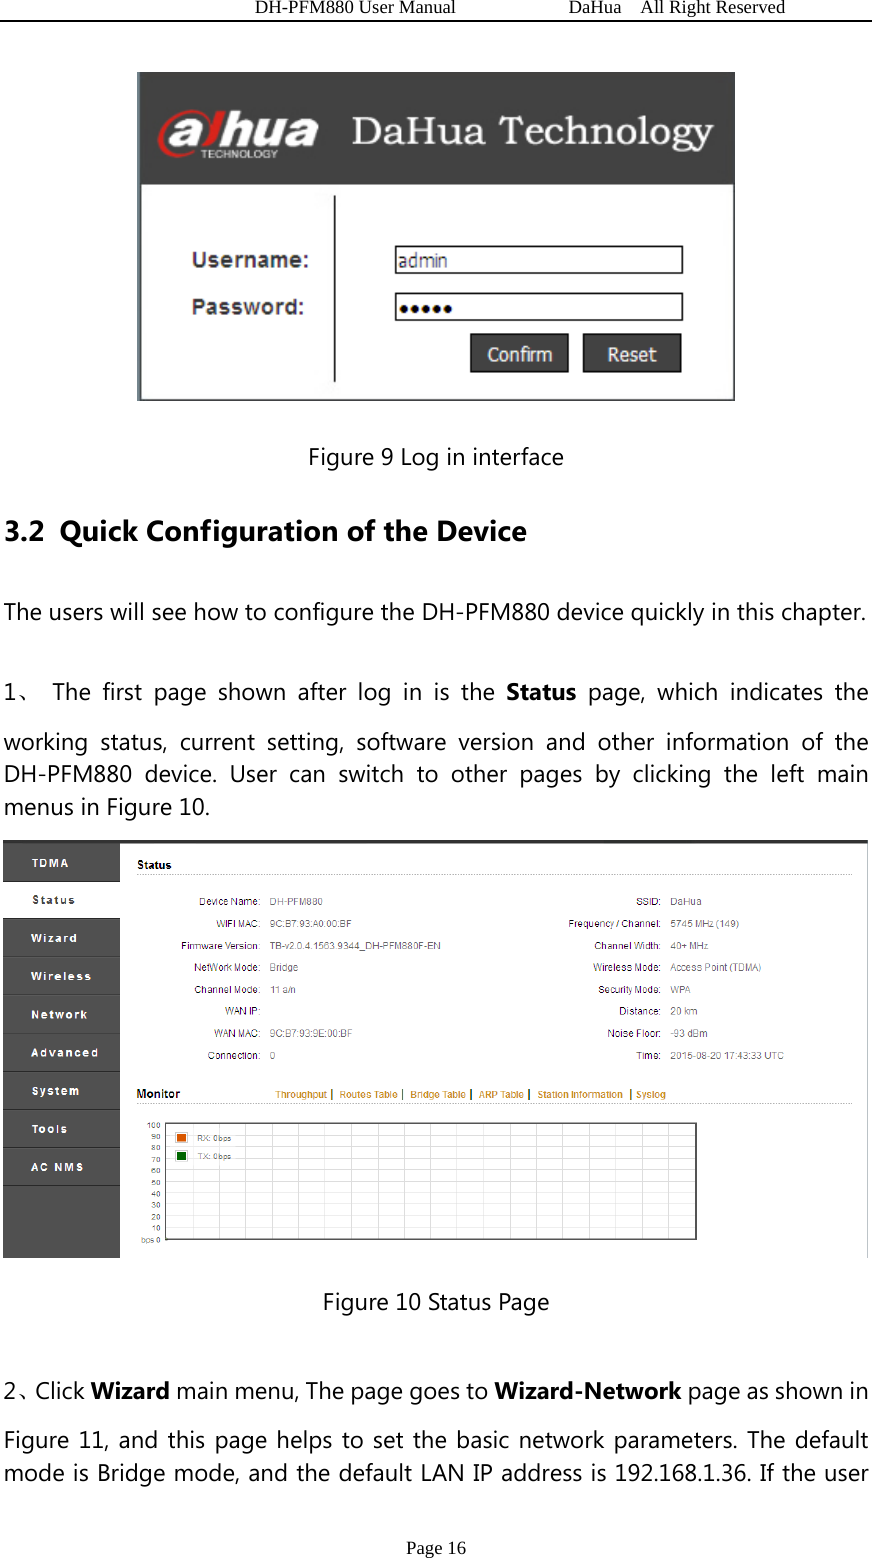   DH-PFM880 User Manual            DaHua  All Right Reserved Page 16  Figure 9 Log in interface 3.2 Quick Configuration of the Device The users will see how to configure the DH-PFM880 device quickly in this chapter. 1、 The first page shown after log in is the Status page, which indicates the working status, current setting, software version and other information of the DH-PFM880 device. User can switch to other pages by clicking the left main menus in Figure 10.  Figure 10 Status Page 2、Click Wizard main menu, The page goes to Wizard-Network page as shown in Figure 11, and this page helps to set the basic network parameters. The default mode is Bridge mode, and the default LAN IP address is 192.168.1.36. If the user 